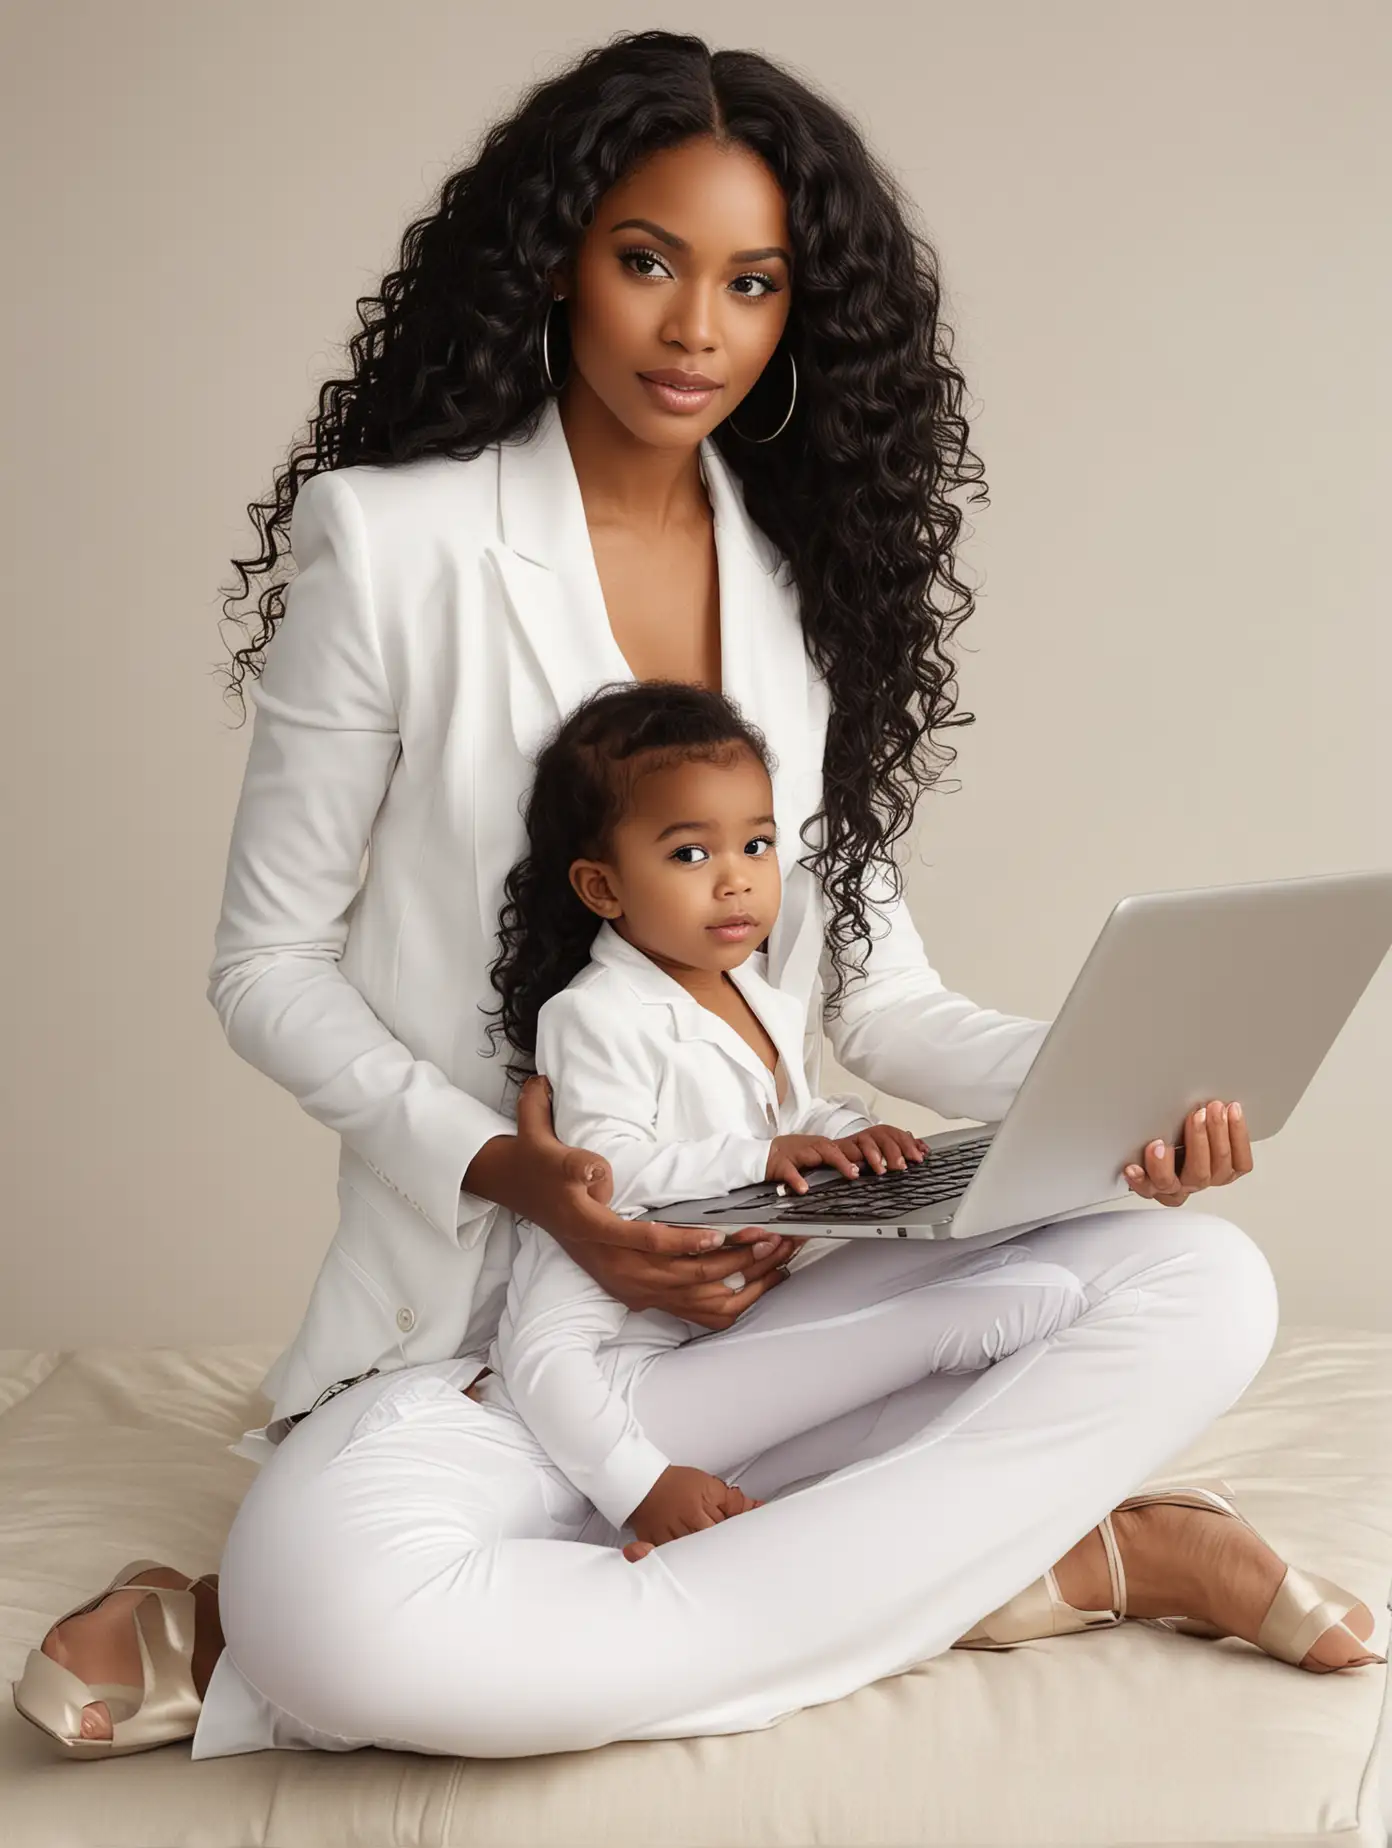 In a full-body photoshoot, we see a realistic portrayal of an African American sexy woman. Her long black hair extensions frame her face as she expertly manages her laptop work while cradling her curly hair baby girl in her arms. Dressed in a chic white suit, she epitomizes the sexy working mother with confidence and grace."